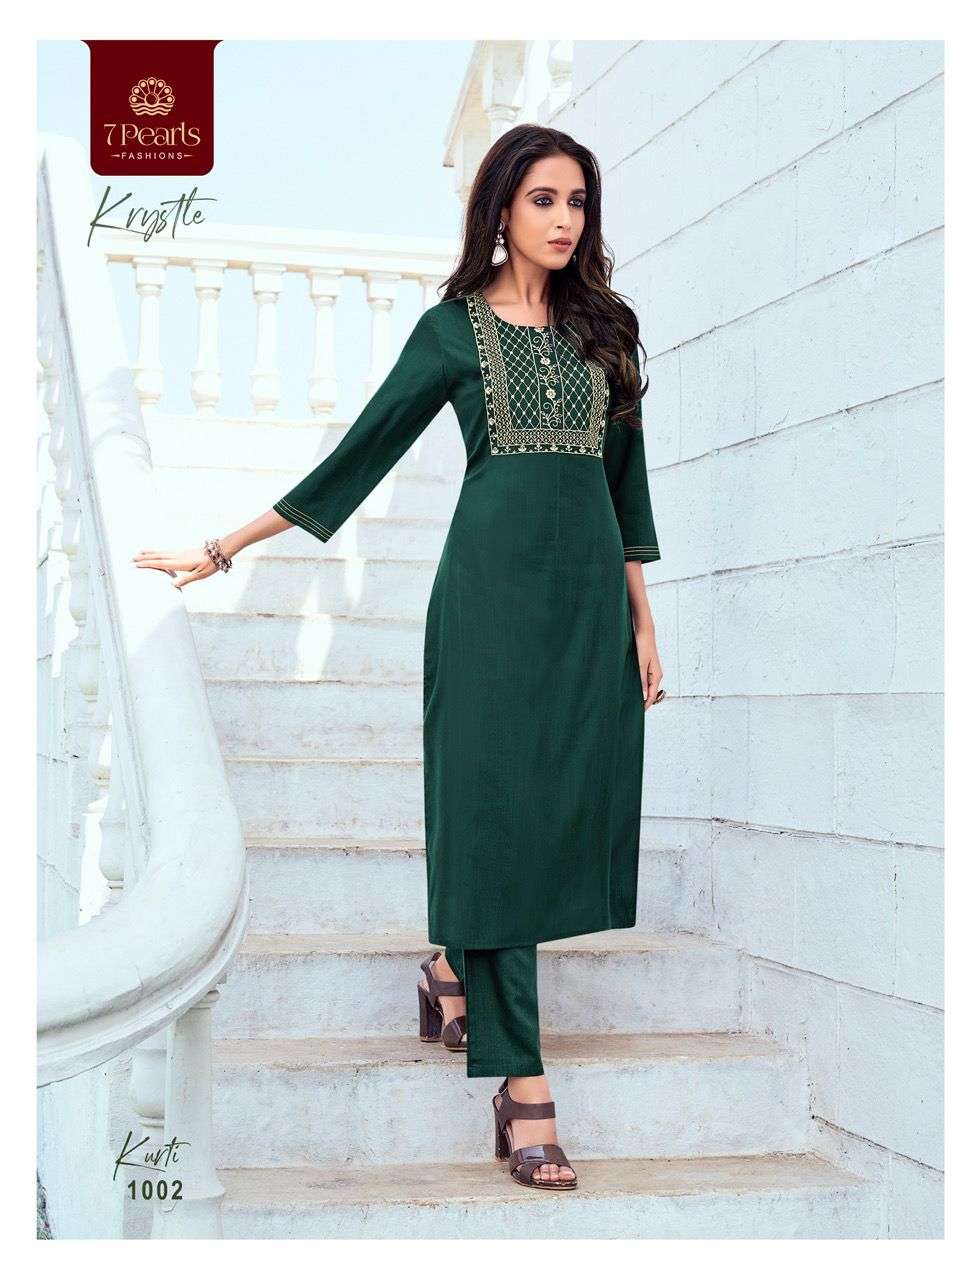 KRYSTLE BY 7 PEARLS 1001 TO 1006 SERIES DESIGNER STYLISH FANCY COLORFUL BEAUTIFUL PARTY WEAR & ETHNIC WEAR COLLECTION VISCOSE EMBROIDERY KURTIS AT WHOLESALE PRICE